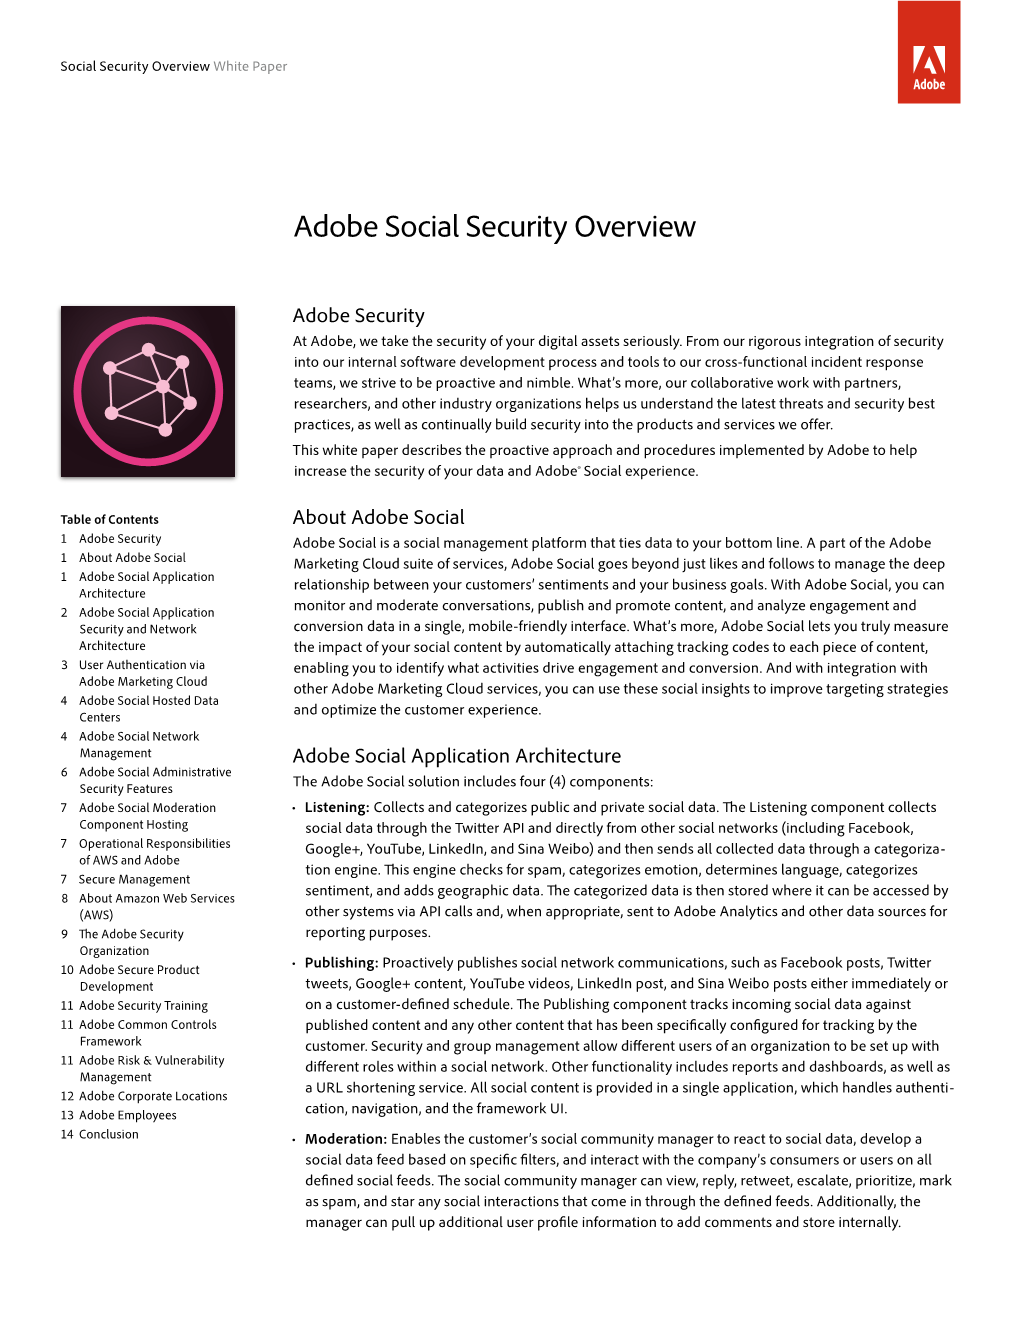 Adobe Social Security Overview